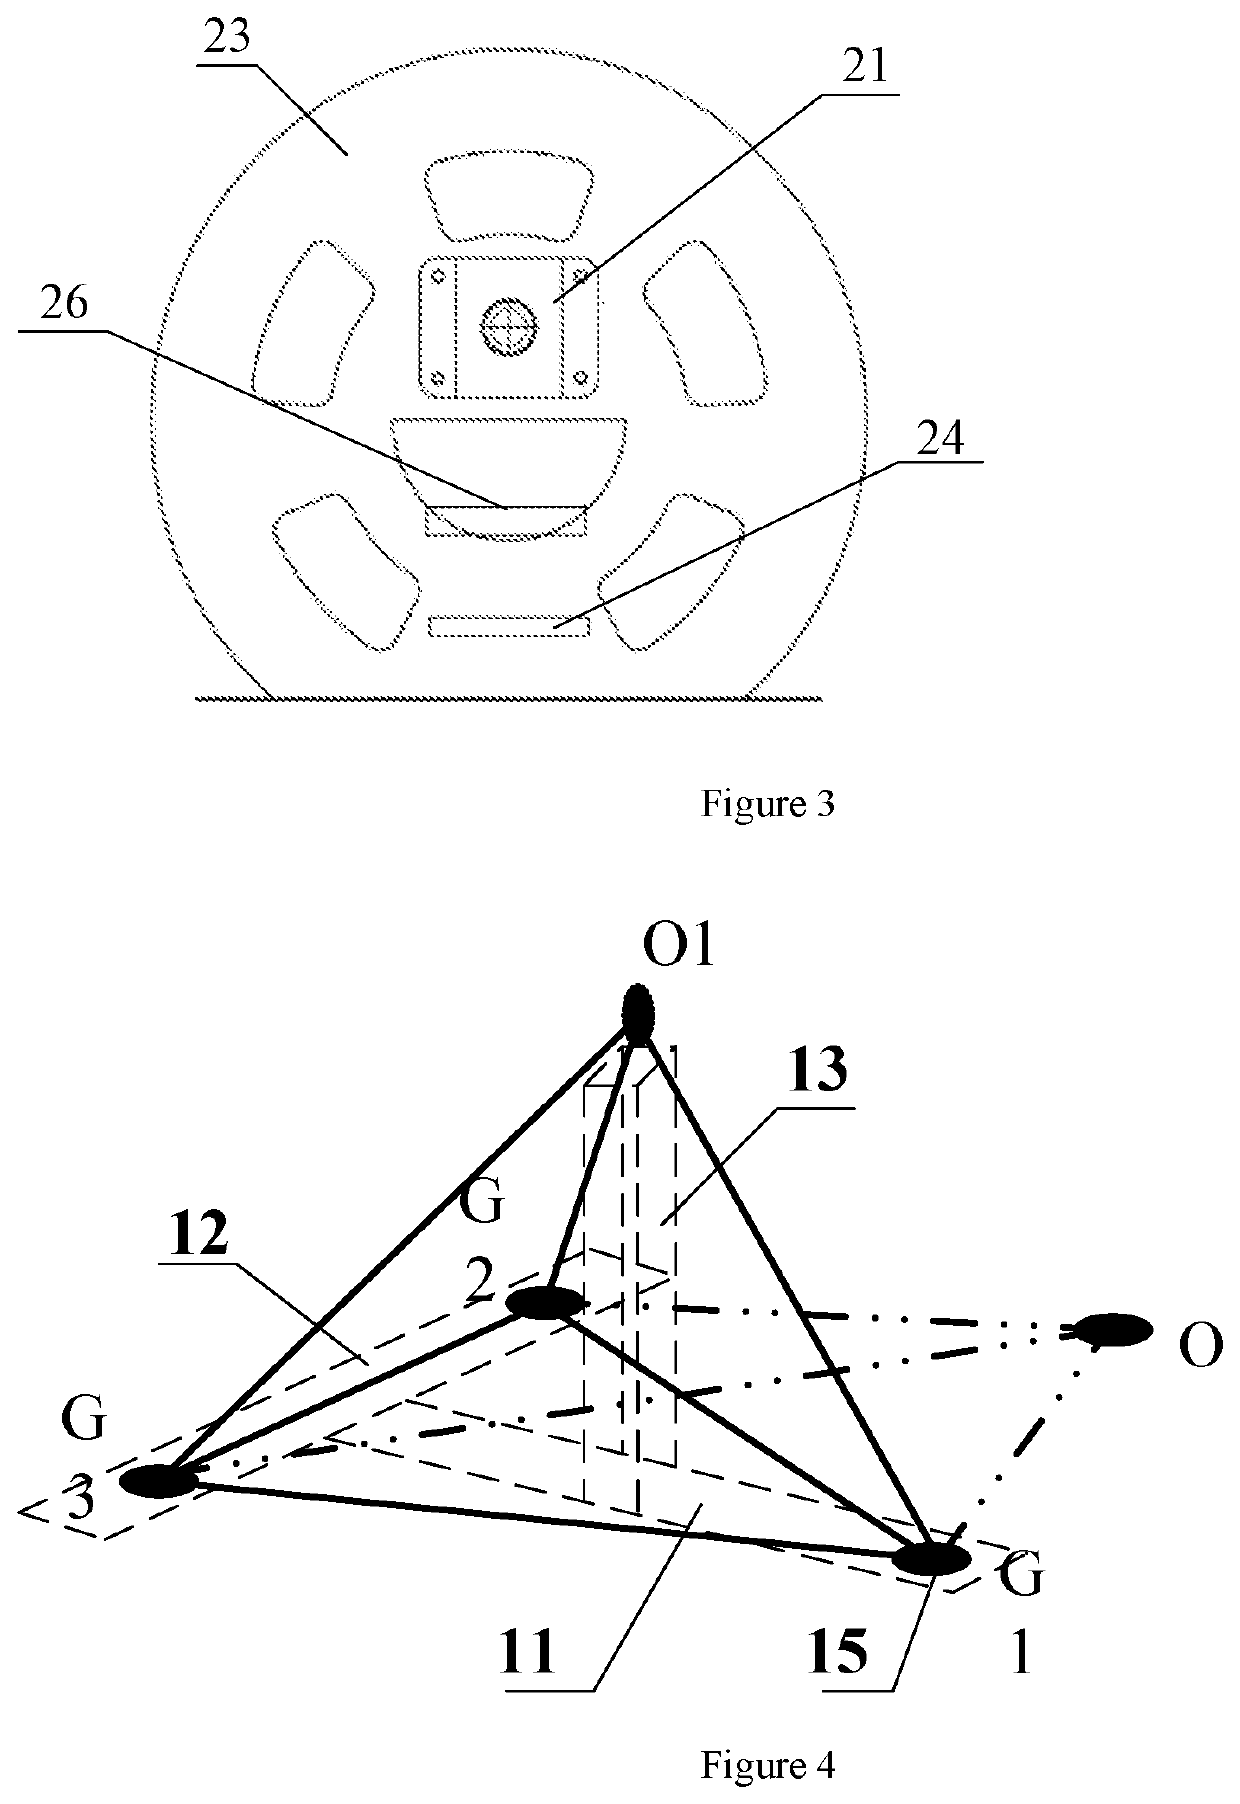 System for quickly detecting tunnel deformation